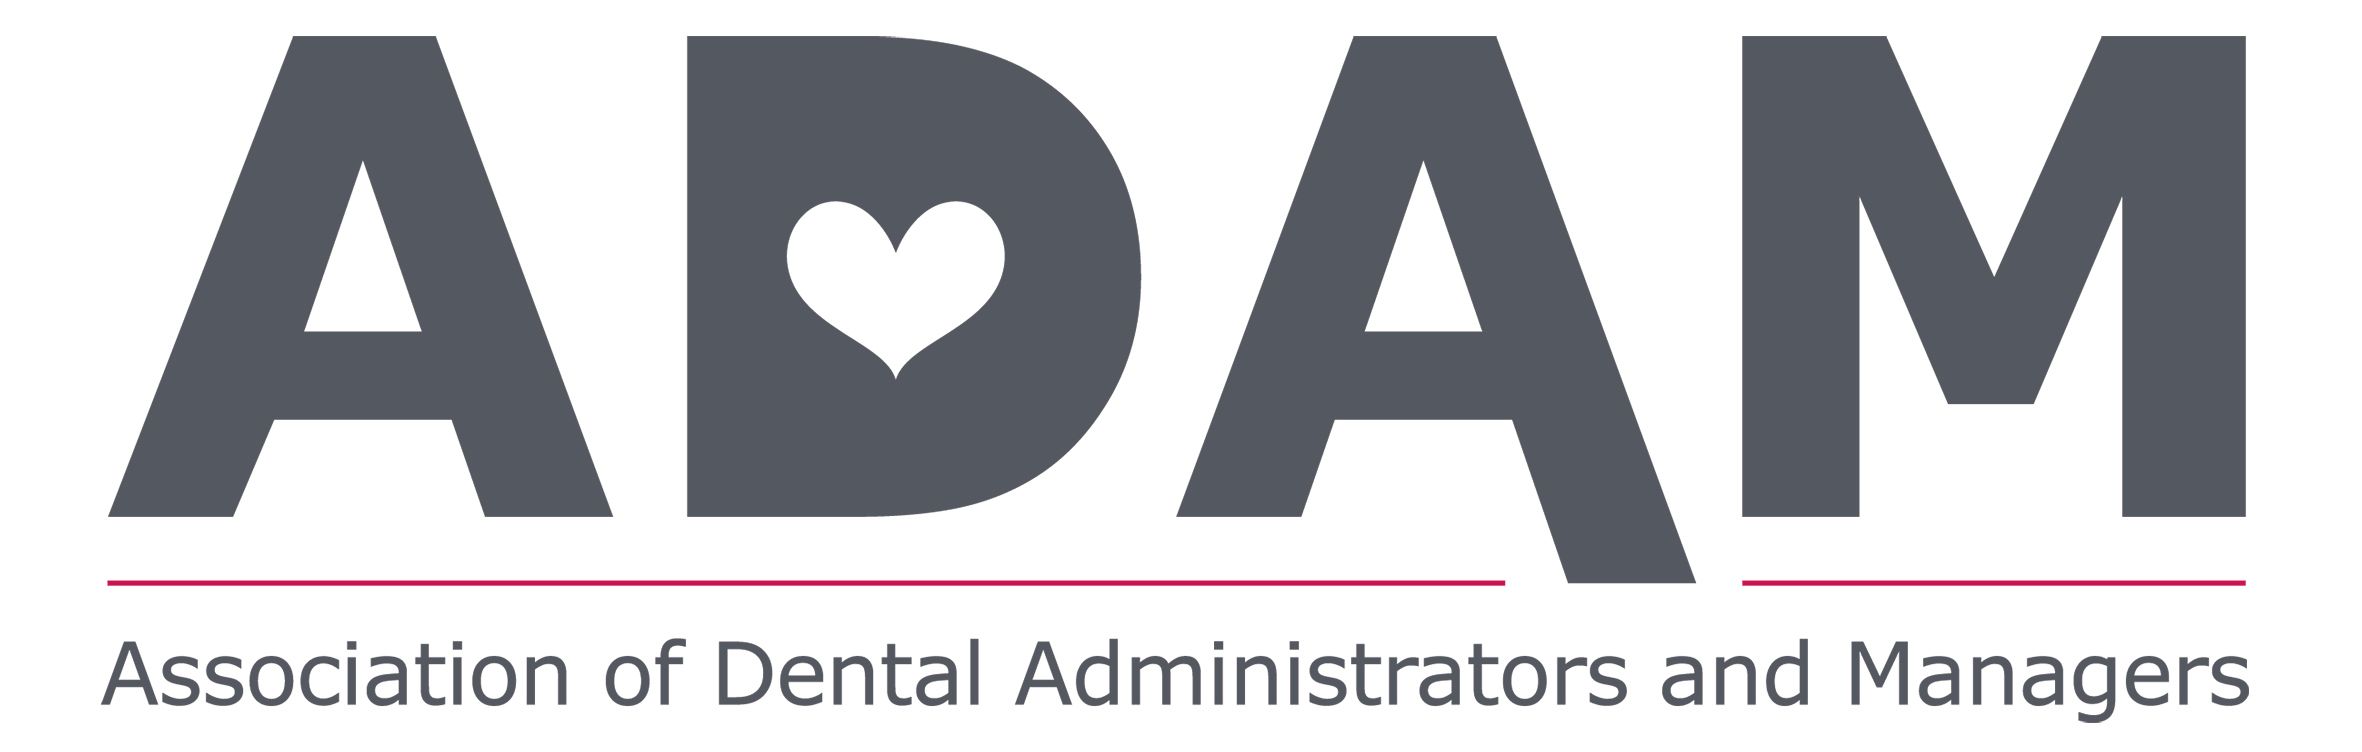 Association of Dental Administrators & Managers